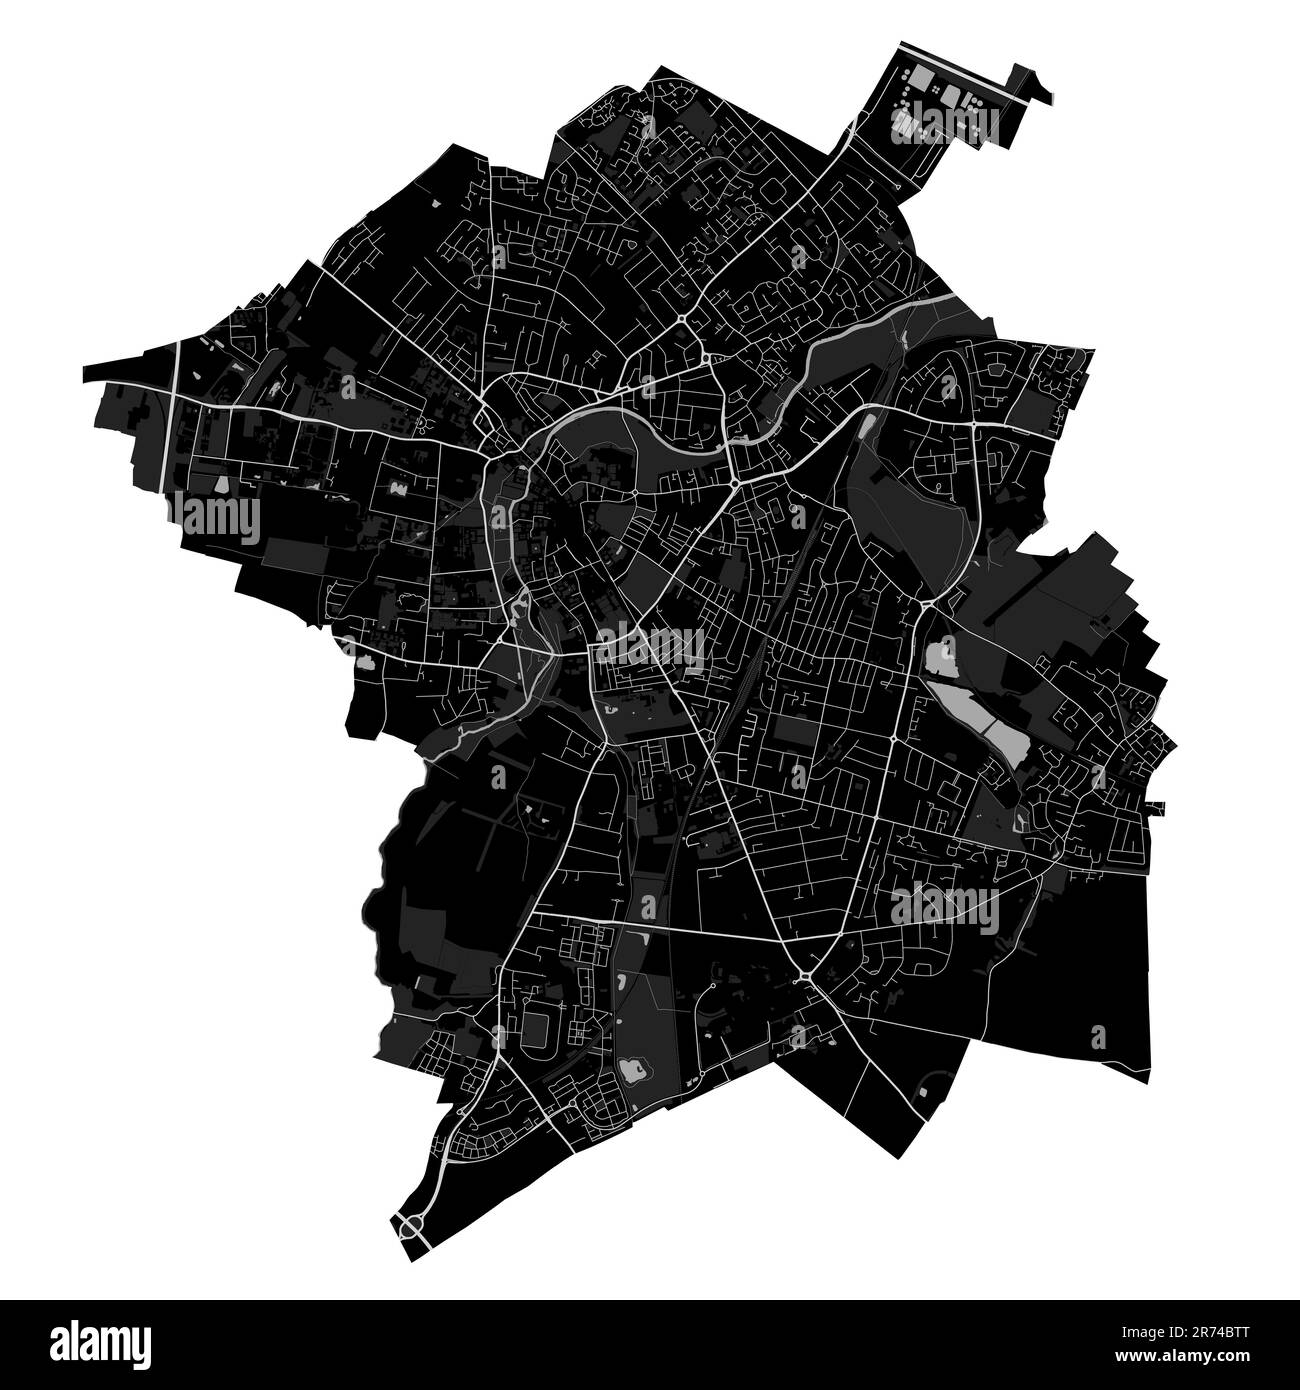 Cambridge city black map, England, the United Kingdom. Detailed administrative map with roads and railways, parks and rivers. City borders. Stock Vector